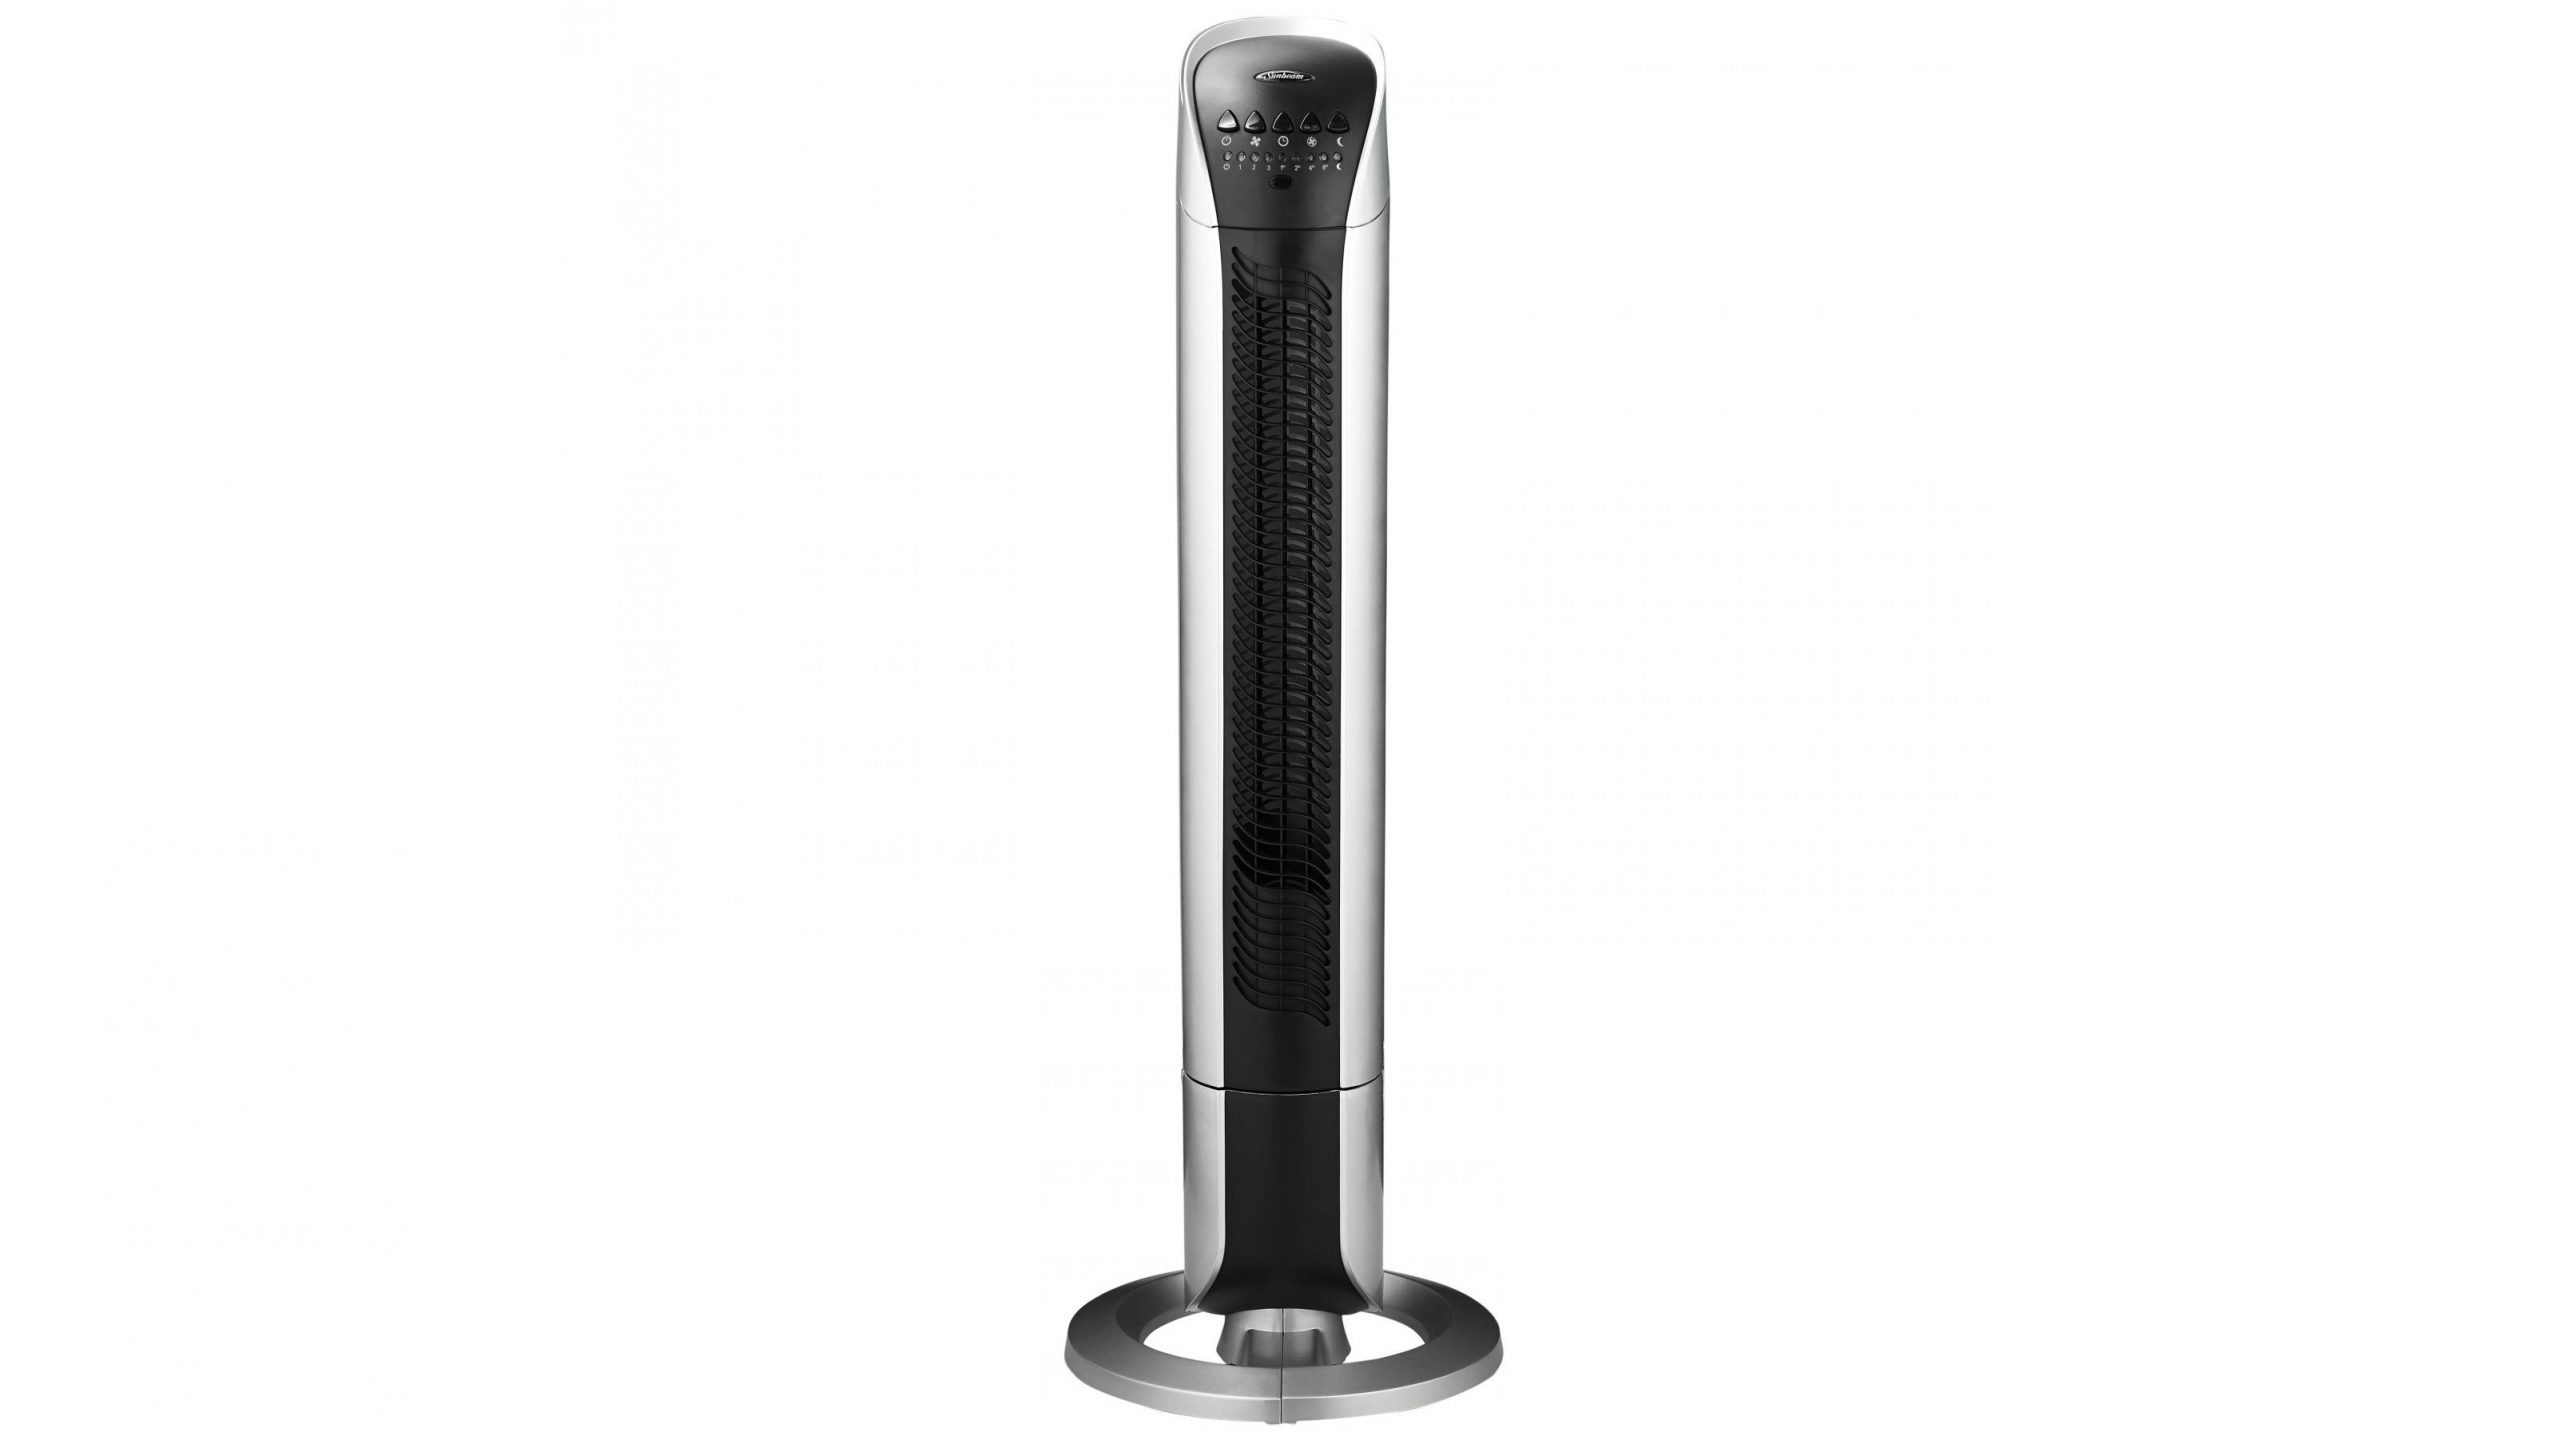 Sunbeam Fa7250 Tower Fan With Night Mode with size 3204 X 1802